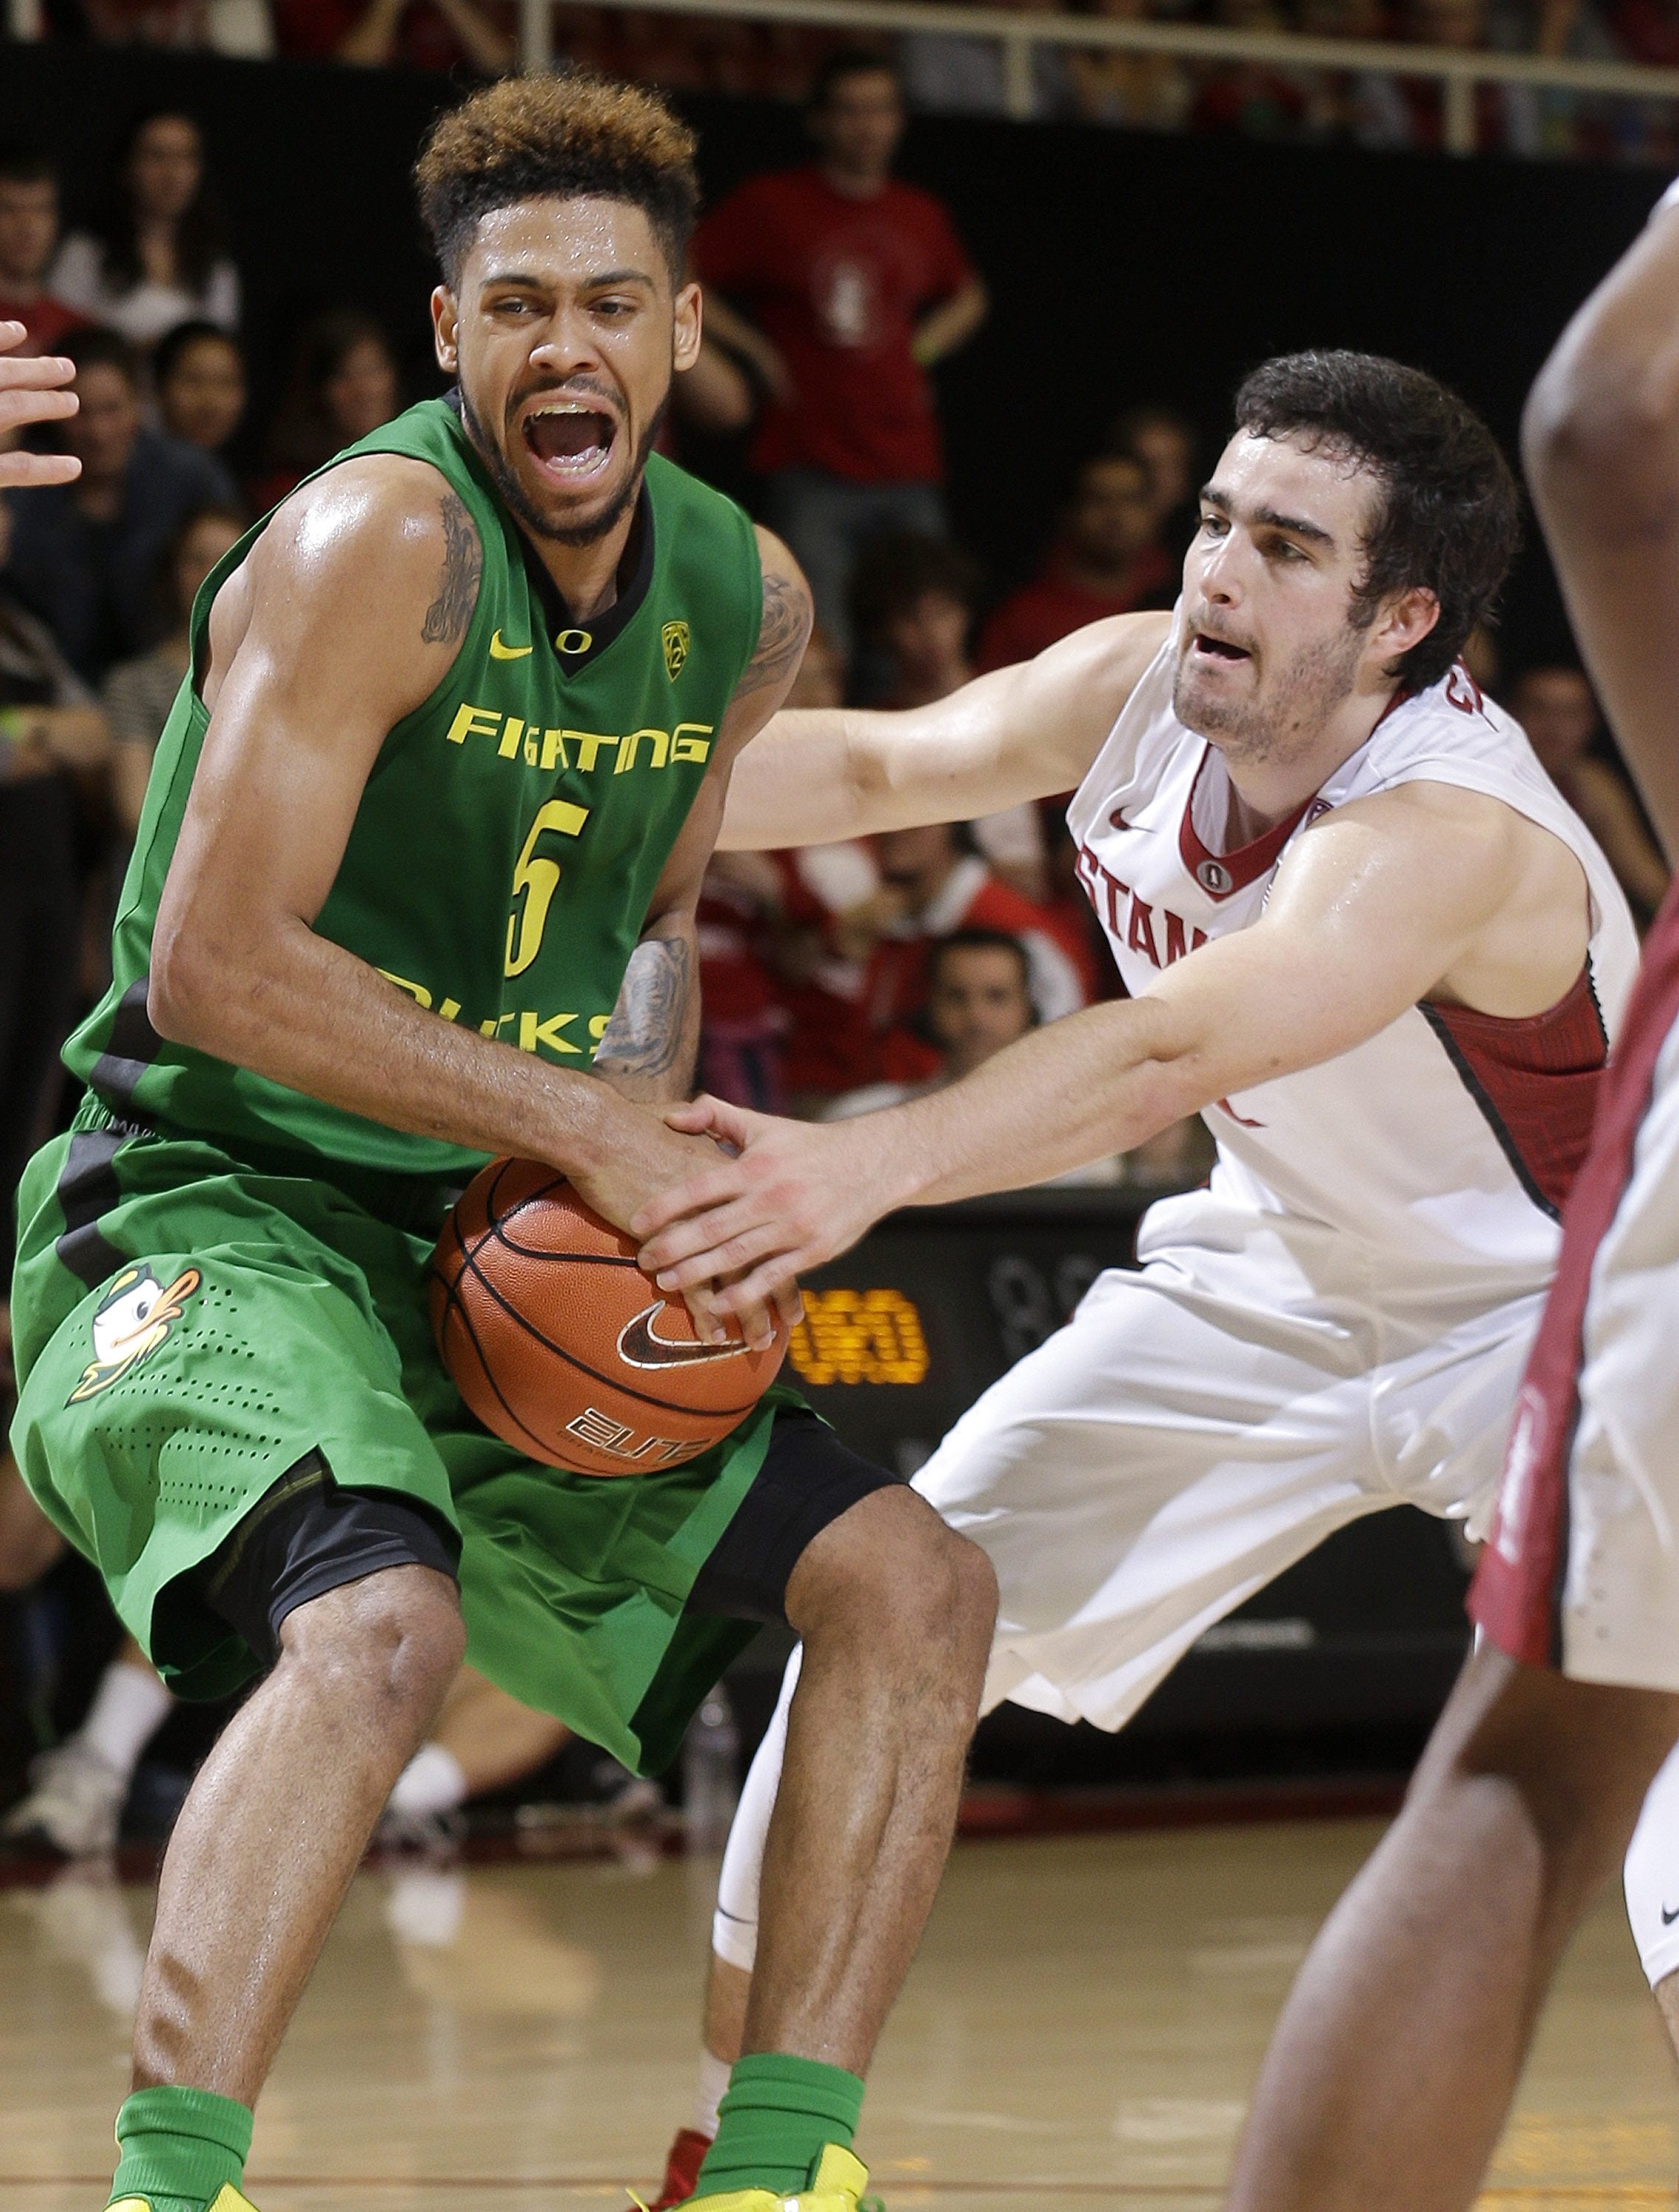 Oregon's Tyler Dorsey (5) is defended by Stanford's Christian Sanders during the first half of an NCAA college basketball game in Stanford, Calif., Saturday, Feb. 13, 2016.